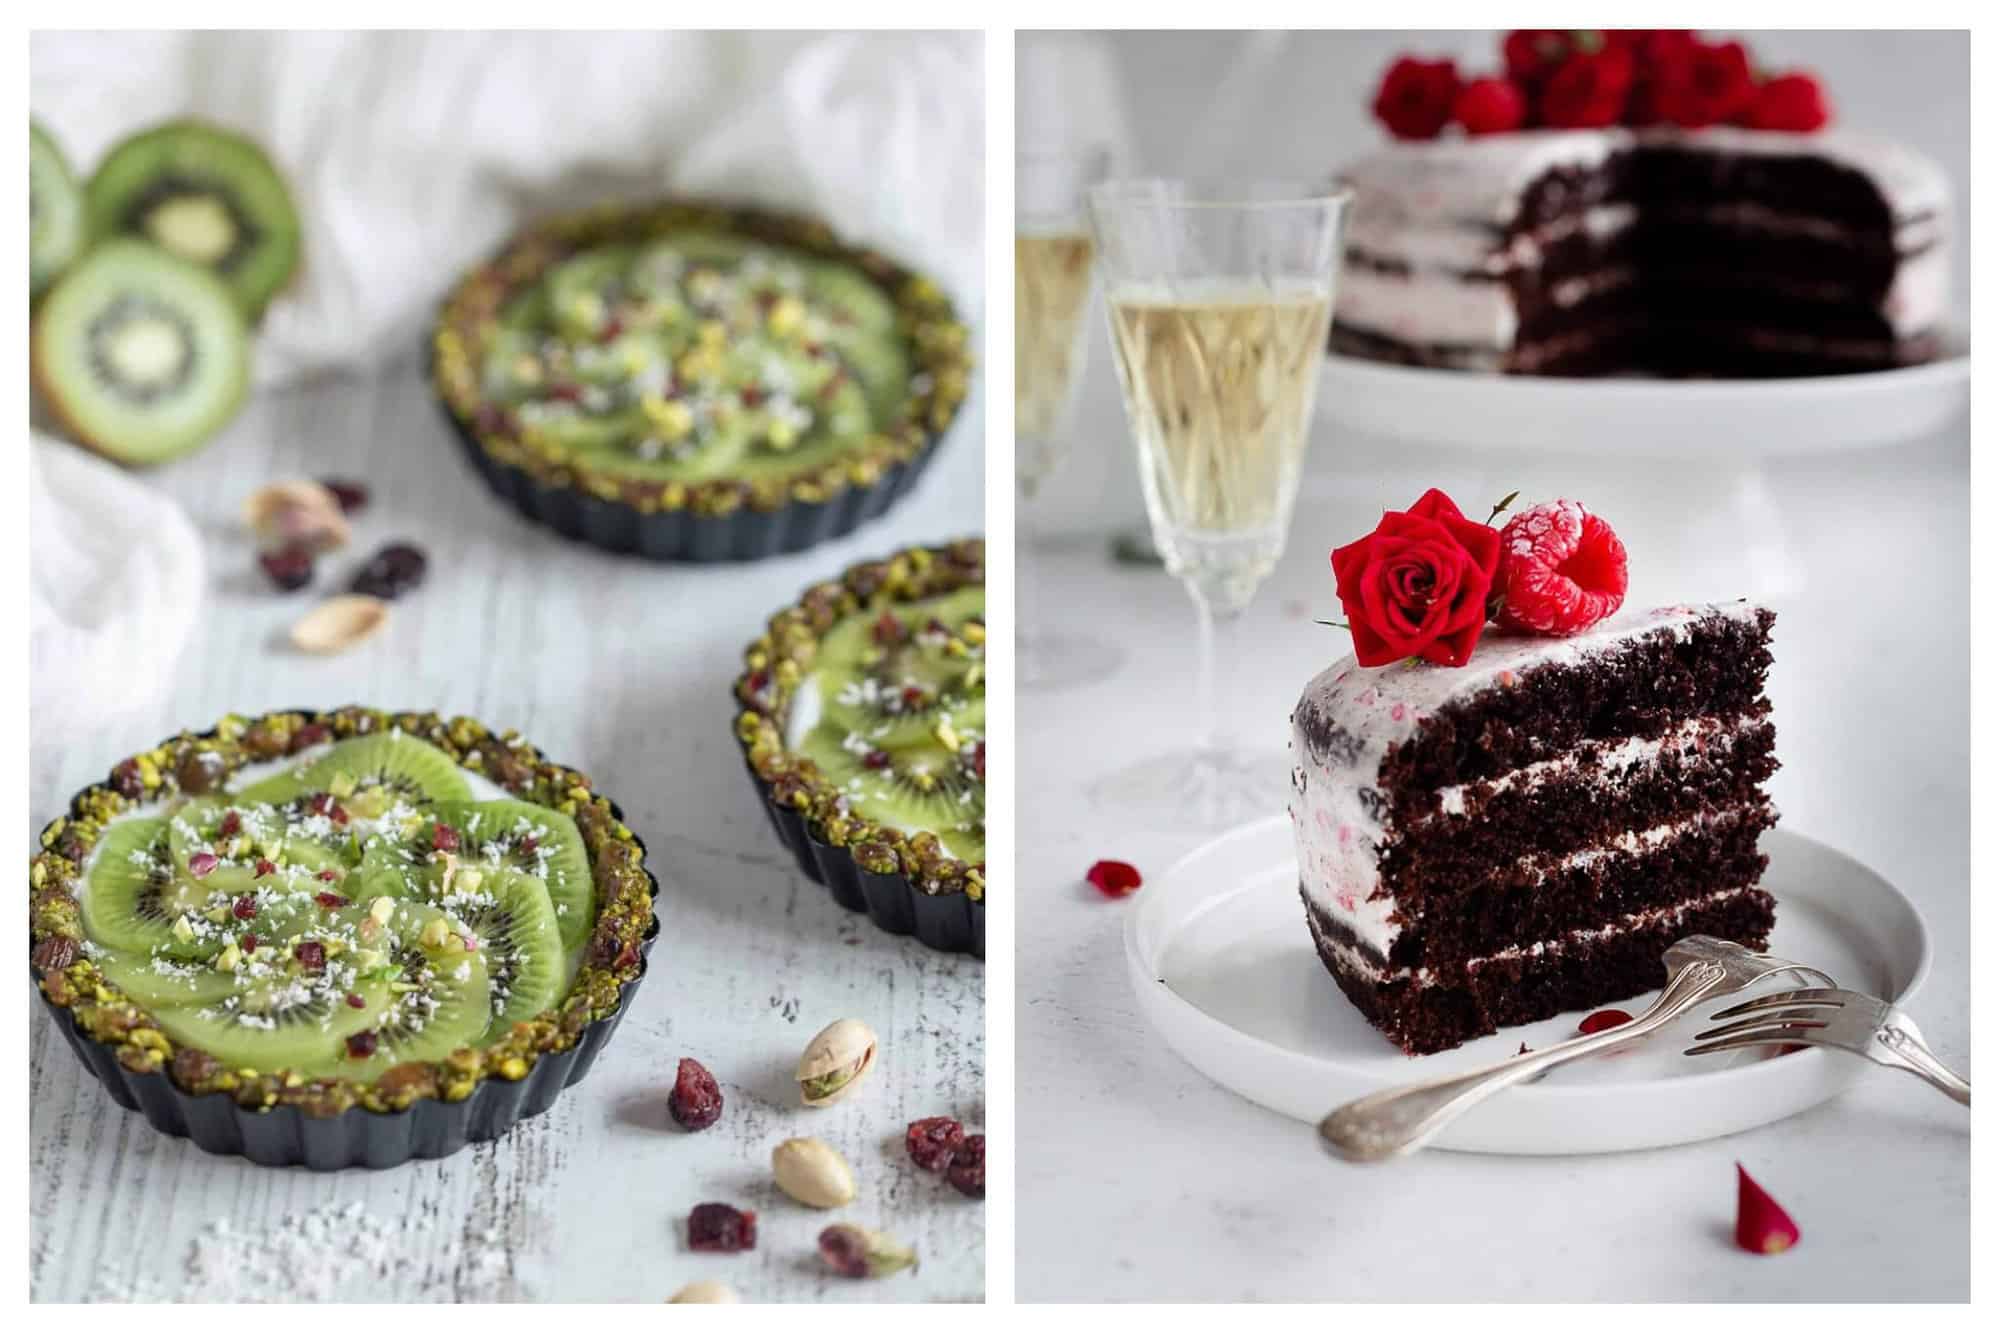 Left: Three kiwi tarts are pictured, garnished with various nuts. Right: A slice of chocolate cake is pictured on a plate, with two forks next to it. The cake has a white and slightly pink icing on it, and a raspberry and rose as a garnish on top. In the background, two filled Champagne flutes, and the rest of the cake is pictured. 